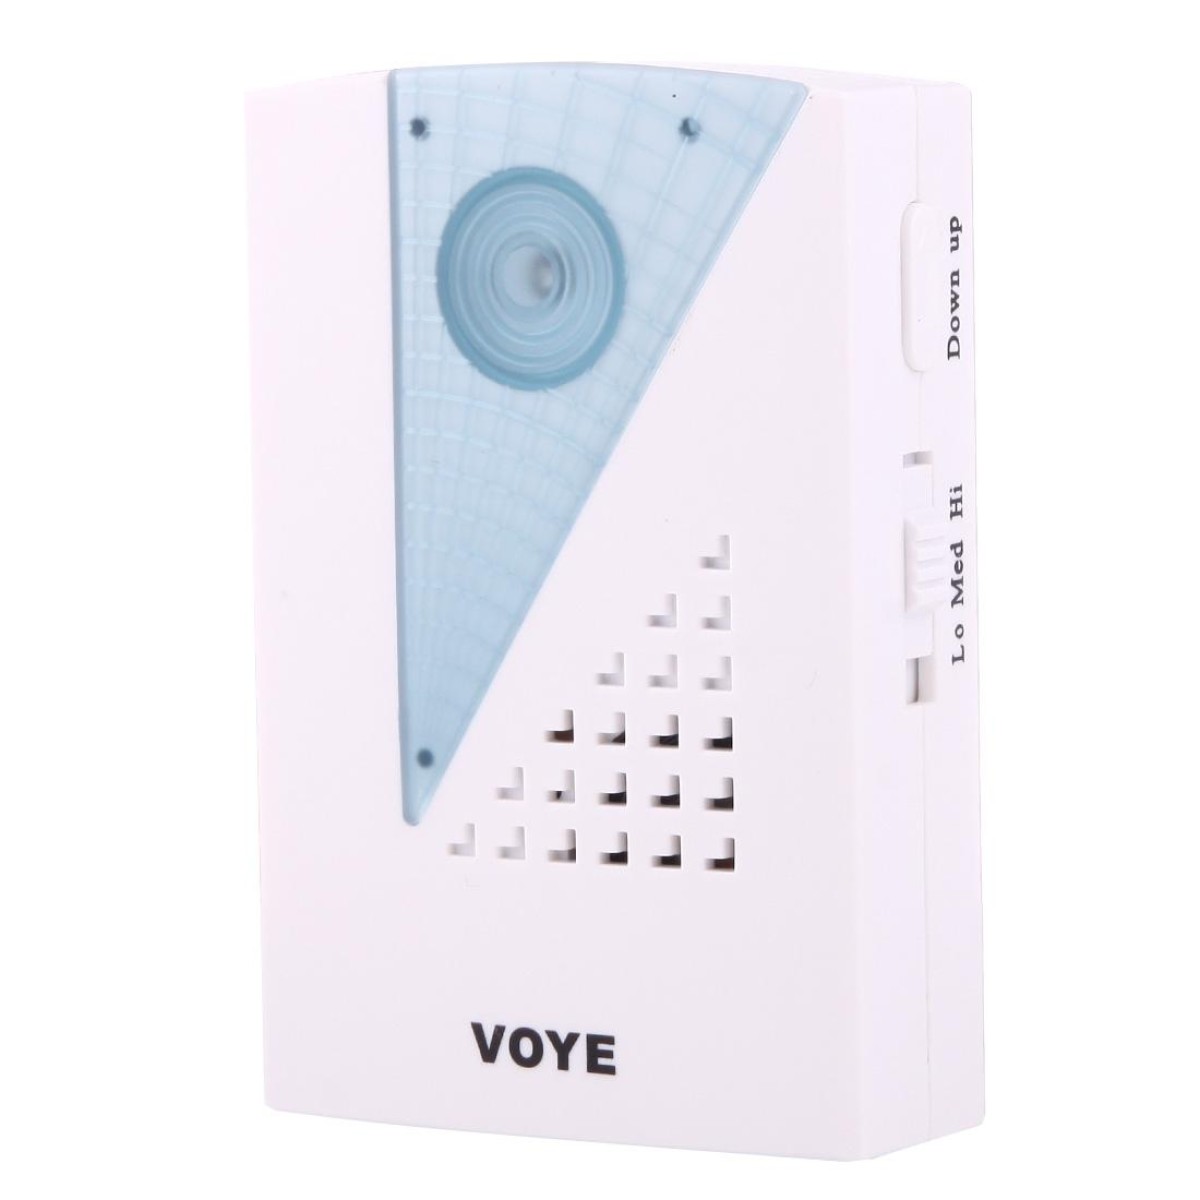 VOYE V001A2 Wireless Smart Music LED Home Doorbell with Dual Receiver, Remote Control Distance: 120m (Open Air)